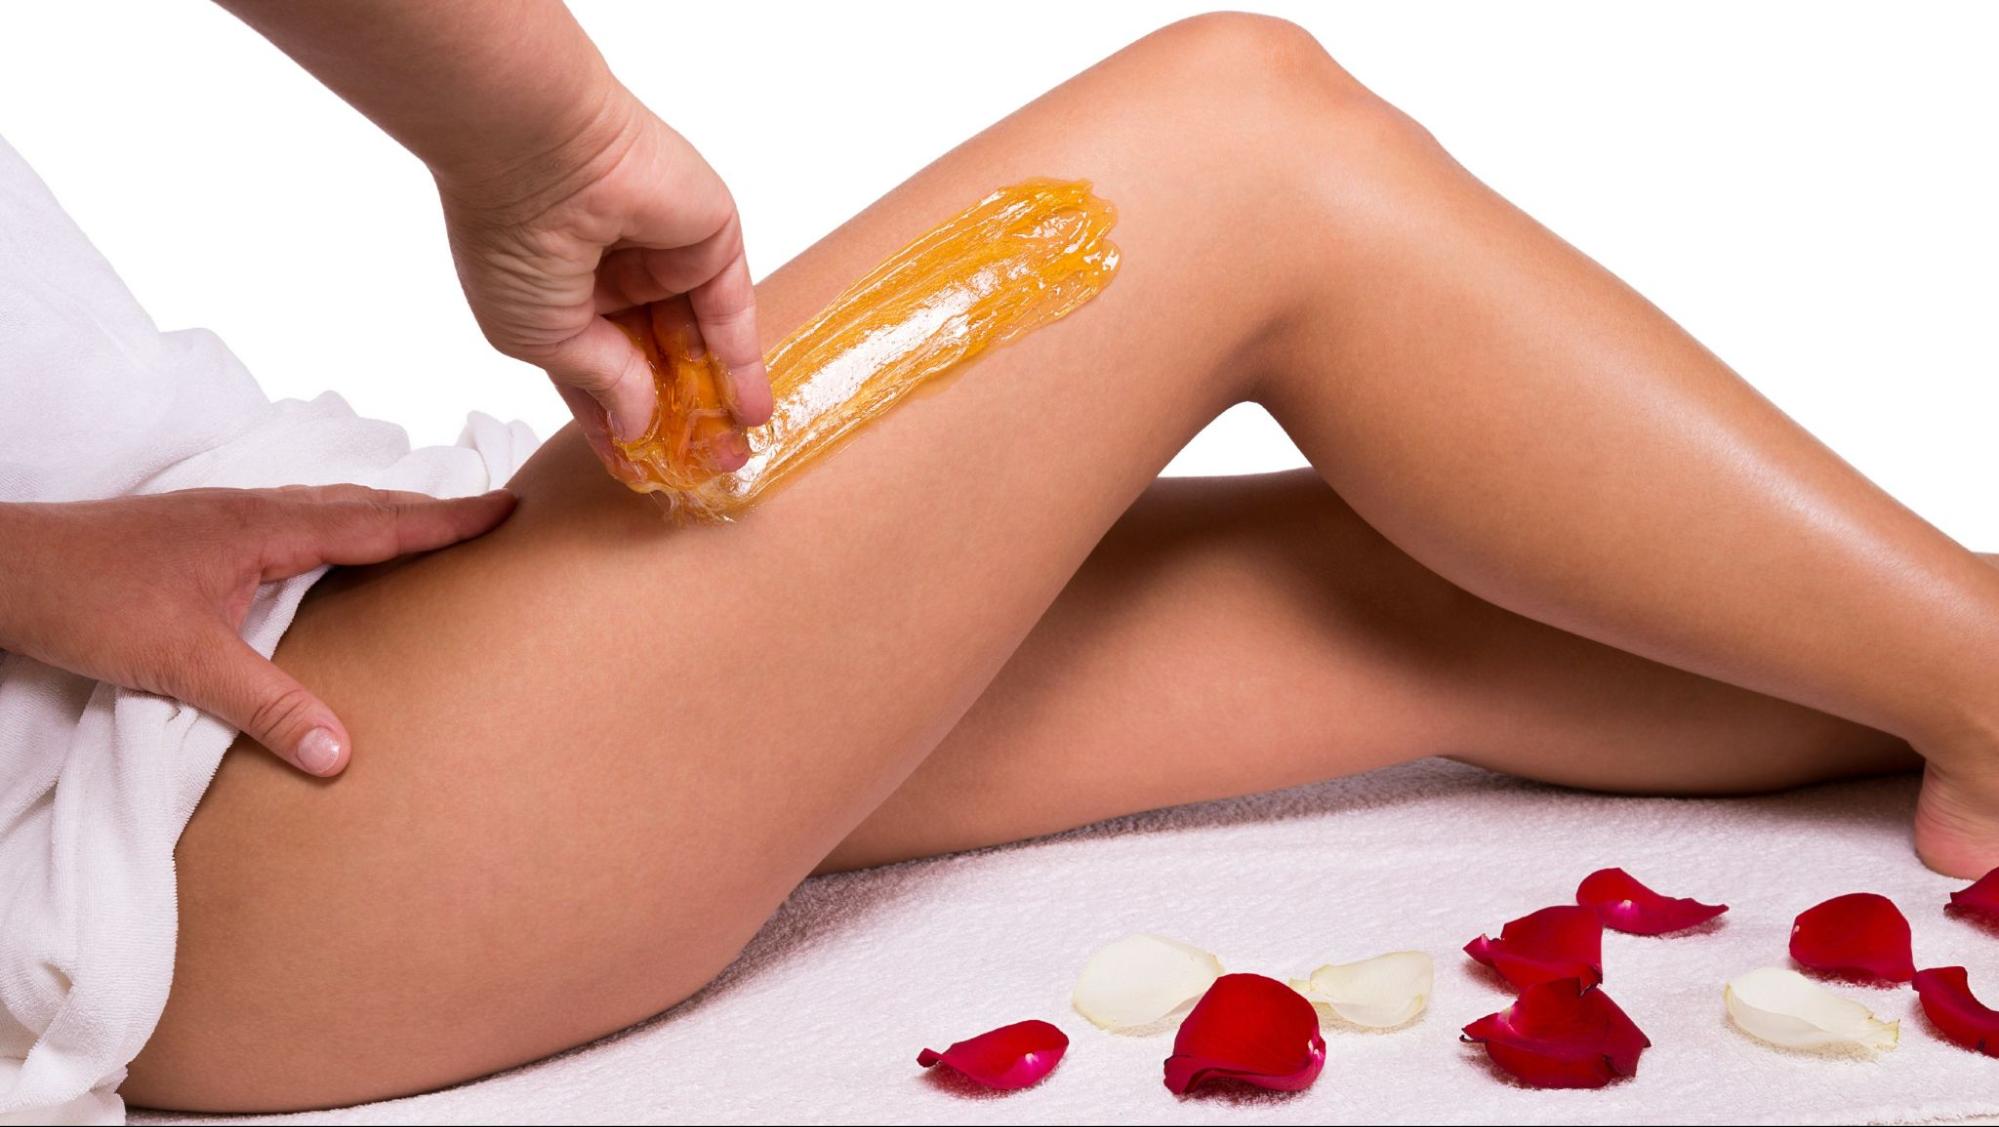 How to Choose a Suitable Paste for Sugaring